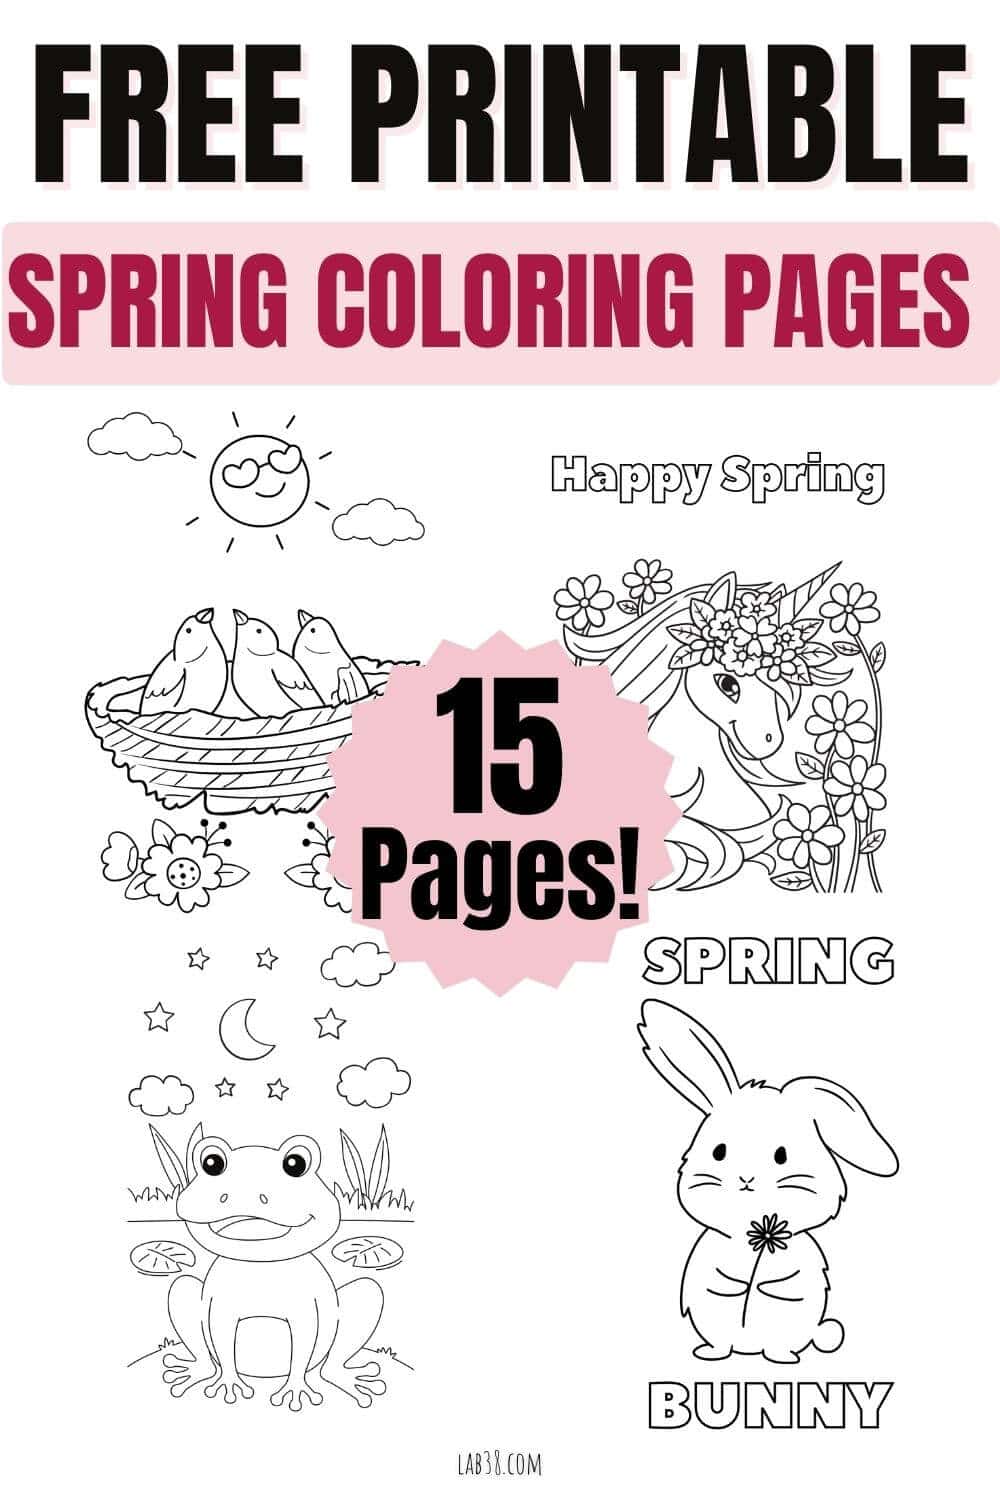 Free Printable Spring Coloring Pages for Kids